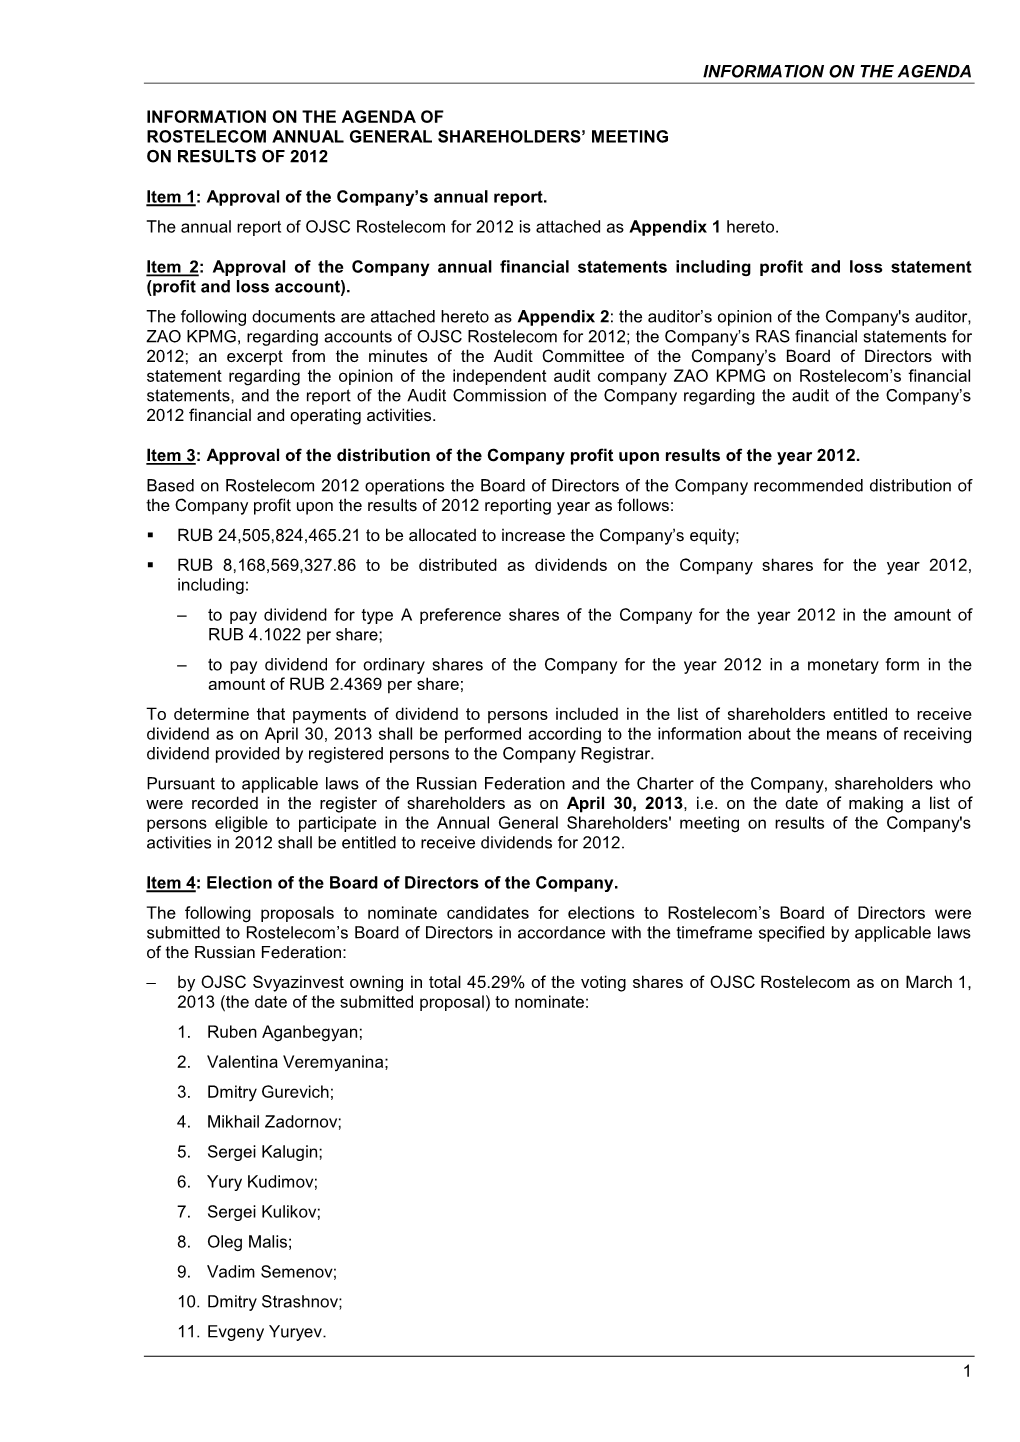 Information on the Agenda of Rostelecom Annual General Shareholders’ Meeting on Results of 2012